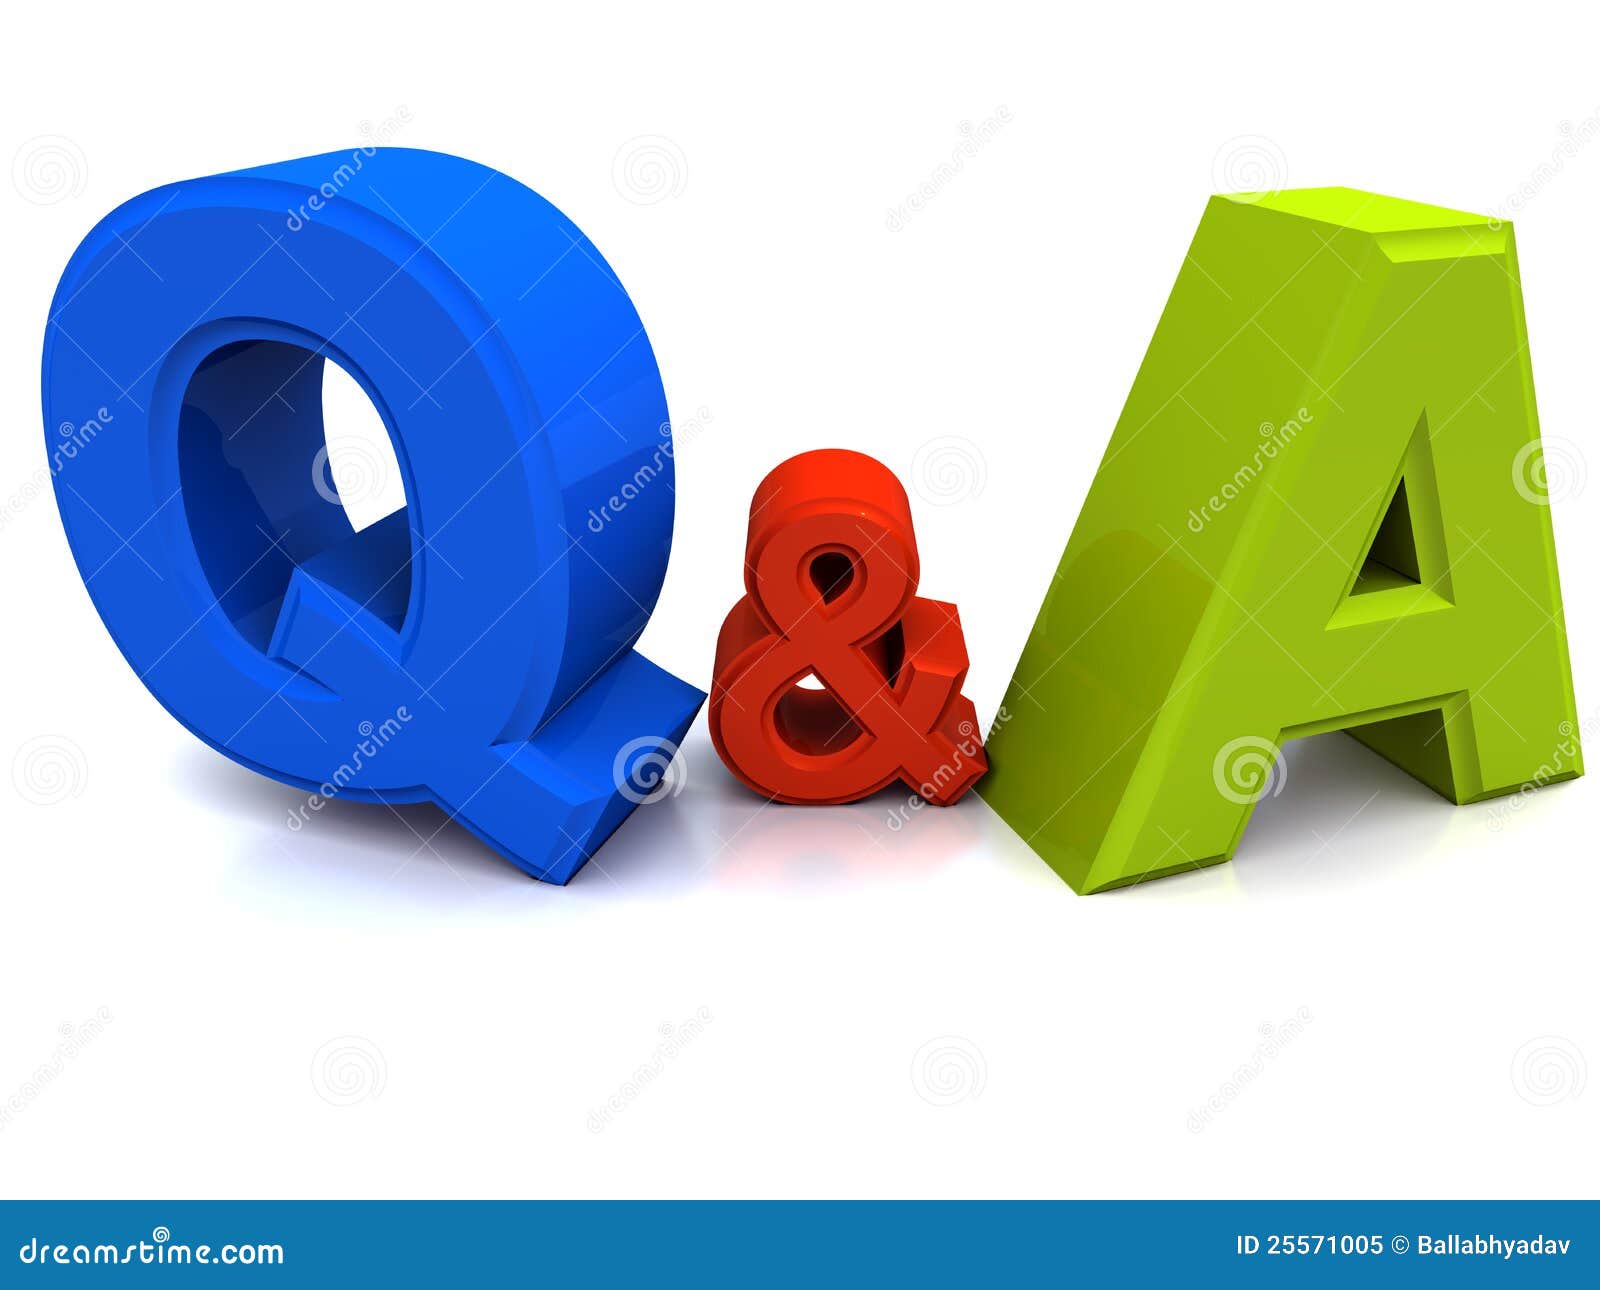 question and answer clipart - photo #23